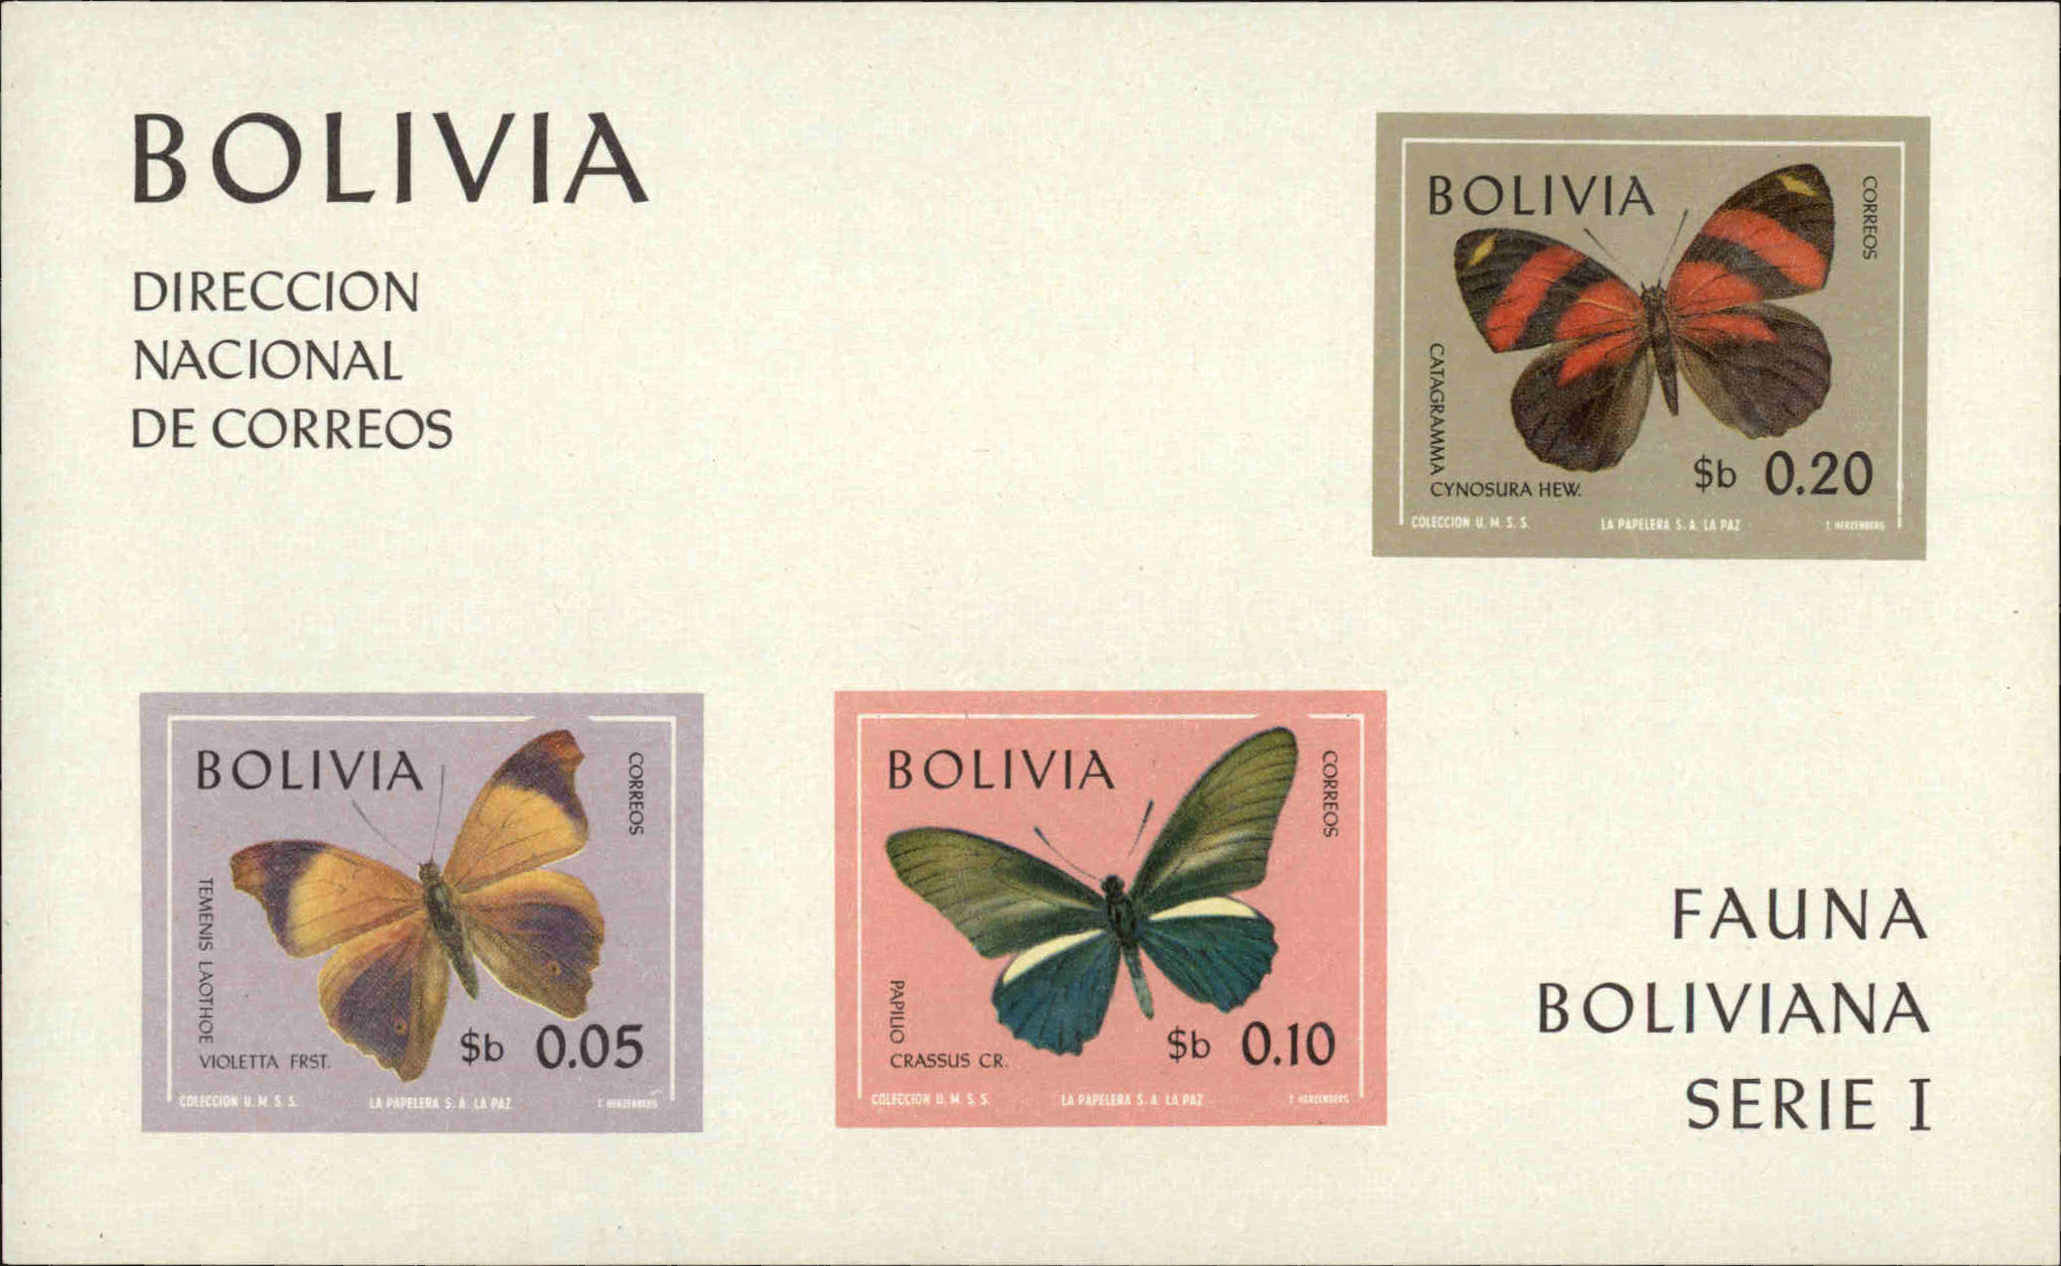 Front view of Bolivia 525a collectors stamp